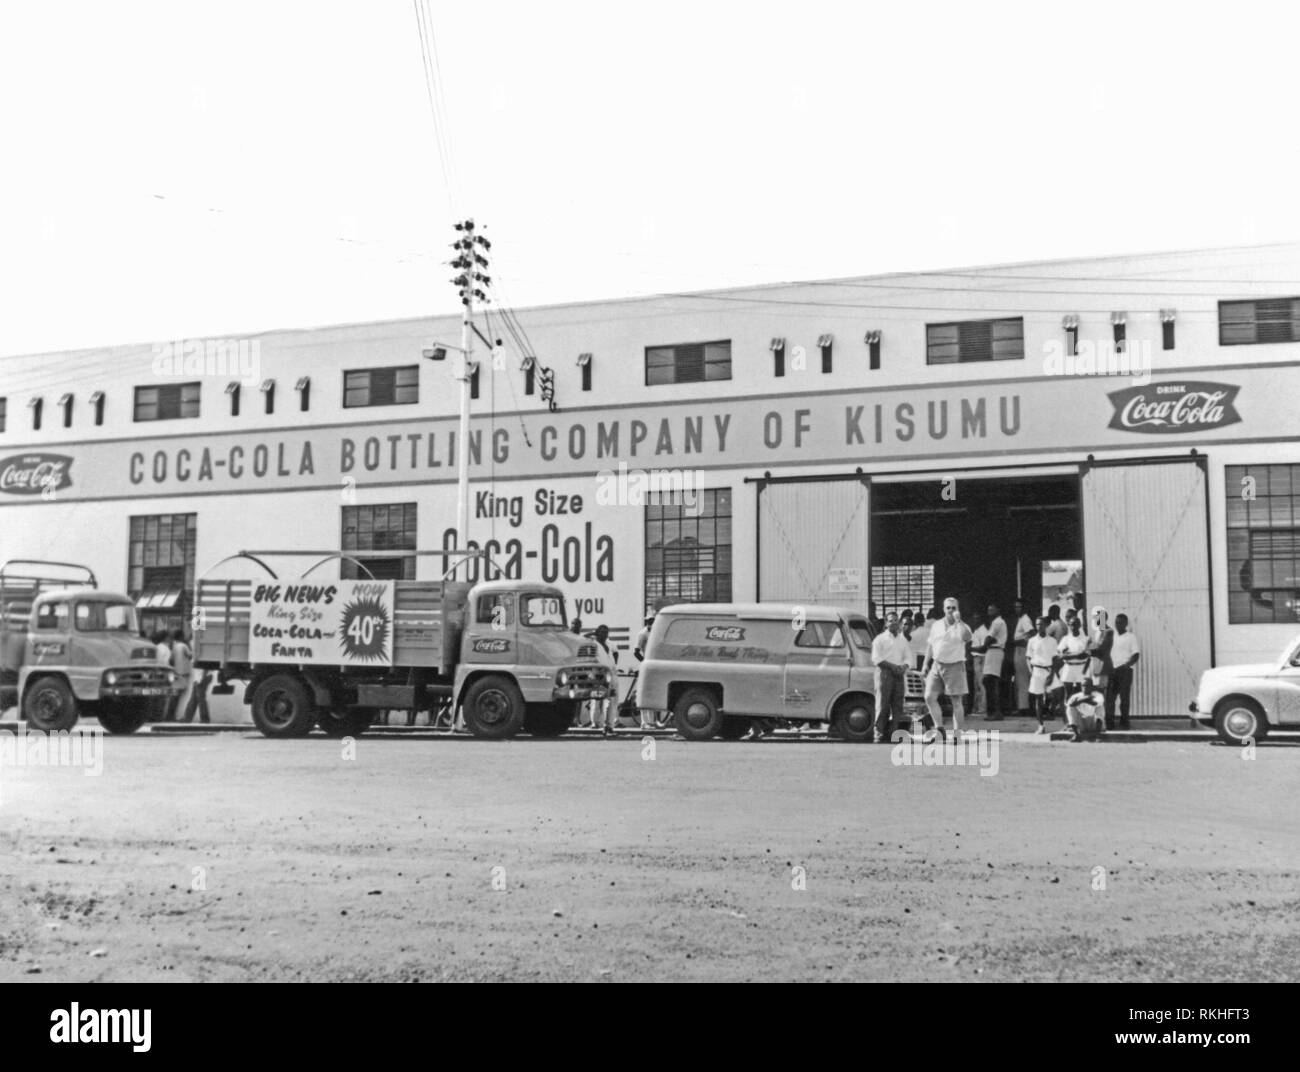 The bottling facility for the Coca-Cola Company in Kisumu c.1960. The plant was established in 1950 at the Kenyan port city on Lake Victoria and was located on the Obote Road. When this plant closed in 1966, Equator Bottlers LTD started operating in a new location. The photograph illustrates that even in the nineteen fifties American soft-drinks brand had a global market Stock Photo